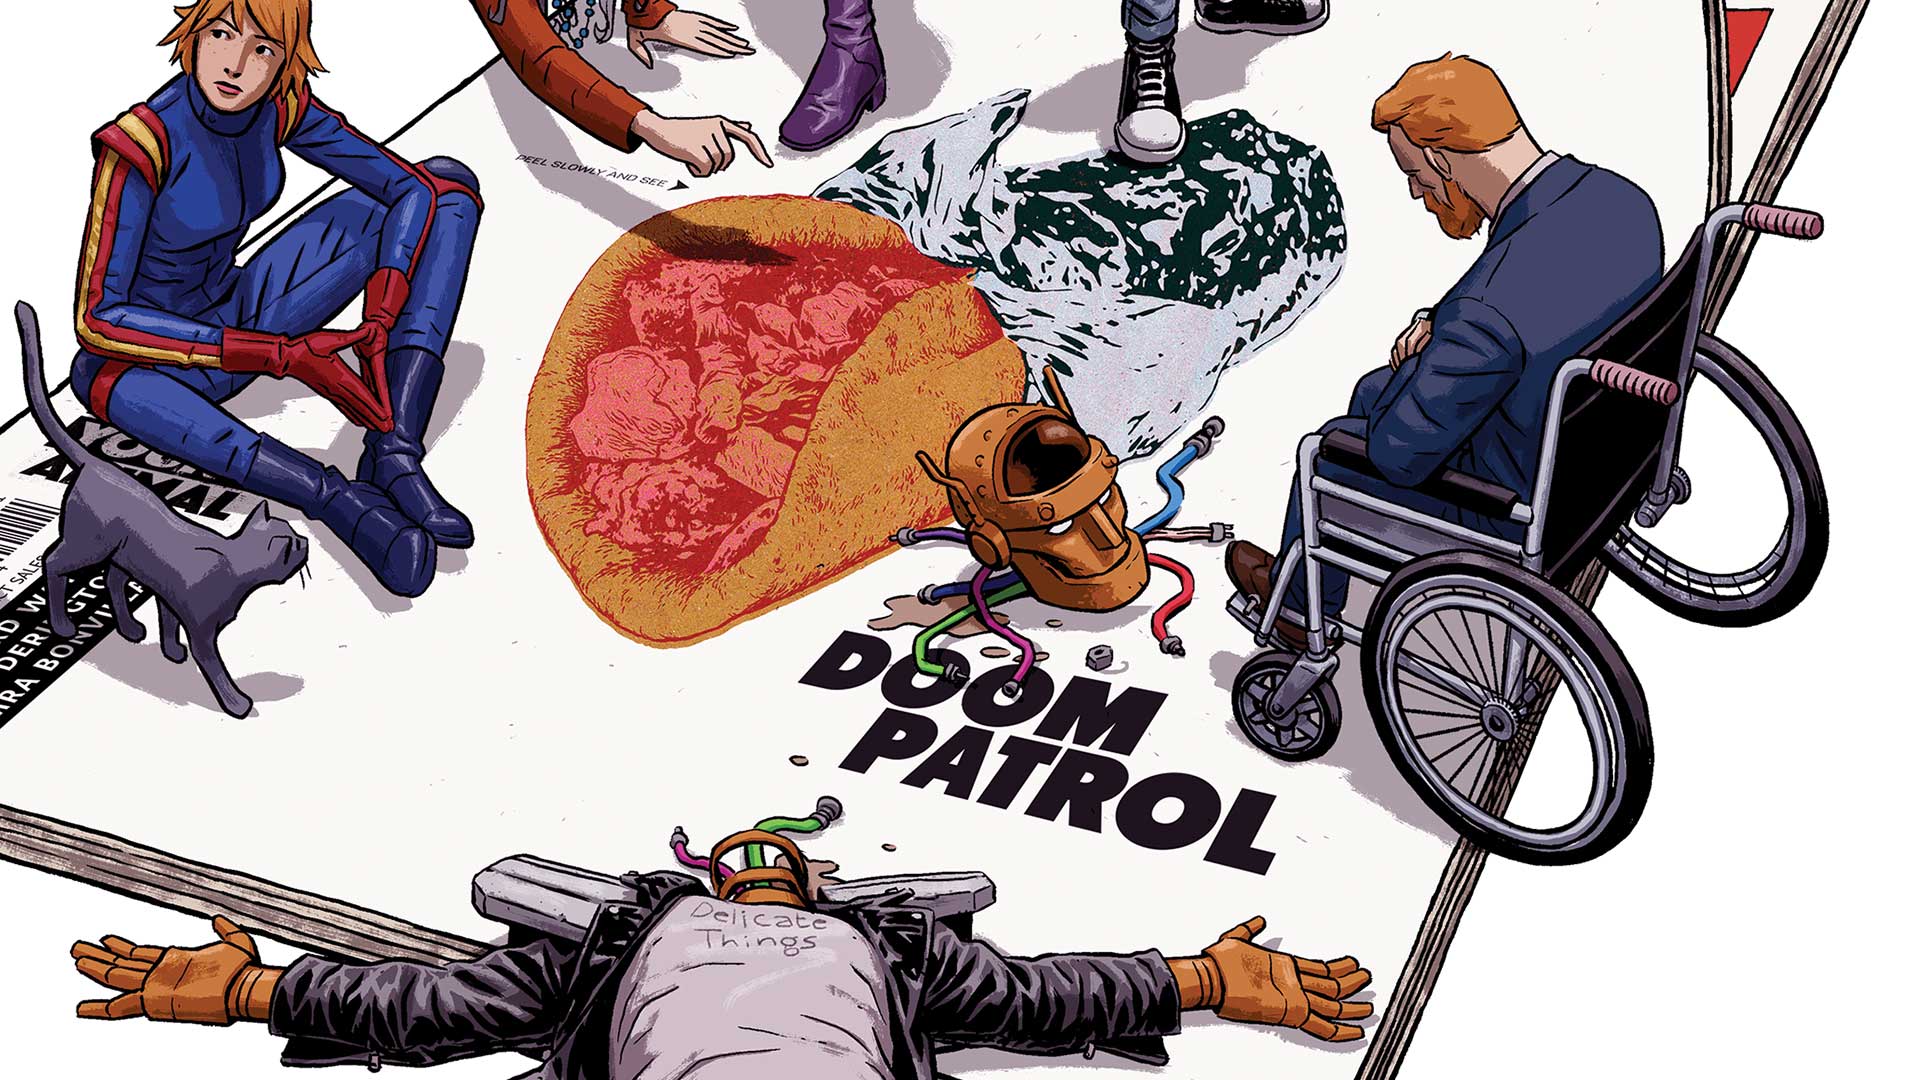 Review: 'Doom Patrol Vol 1: Brick by Brick' is impossibly fun, if completely baffling